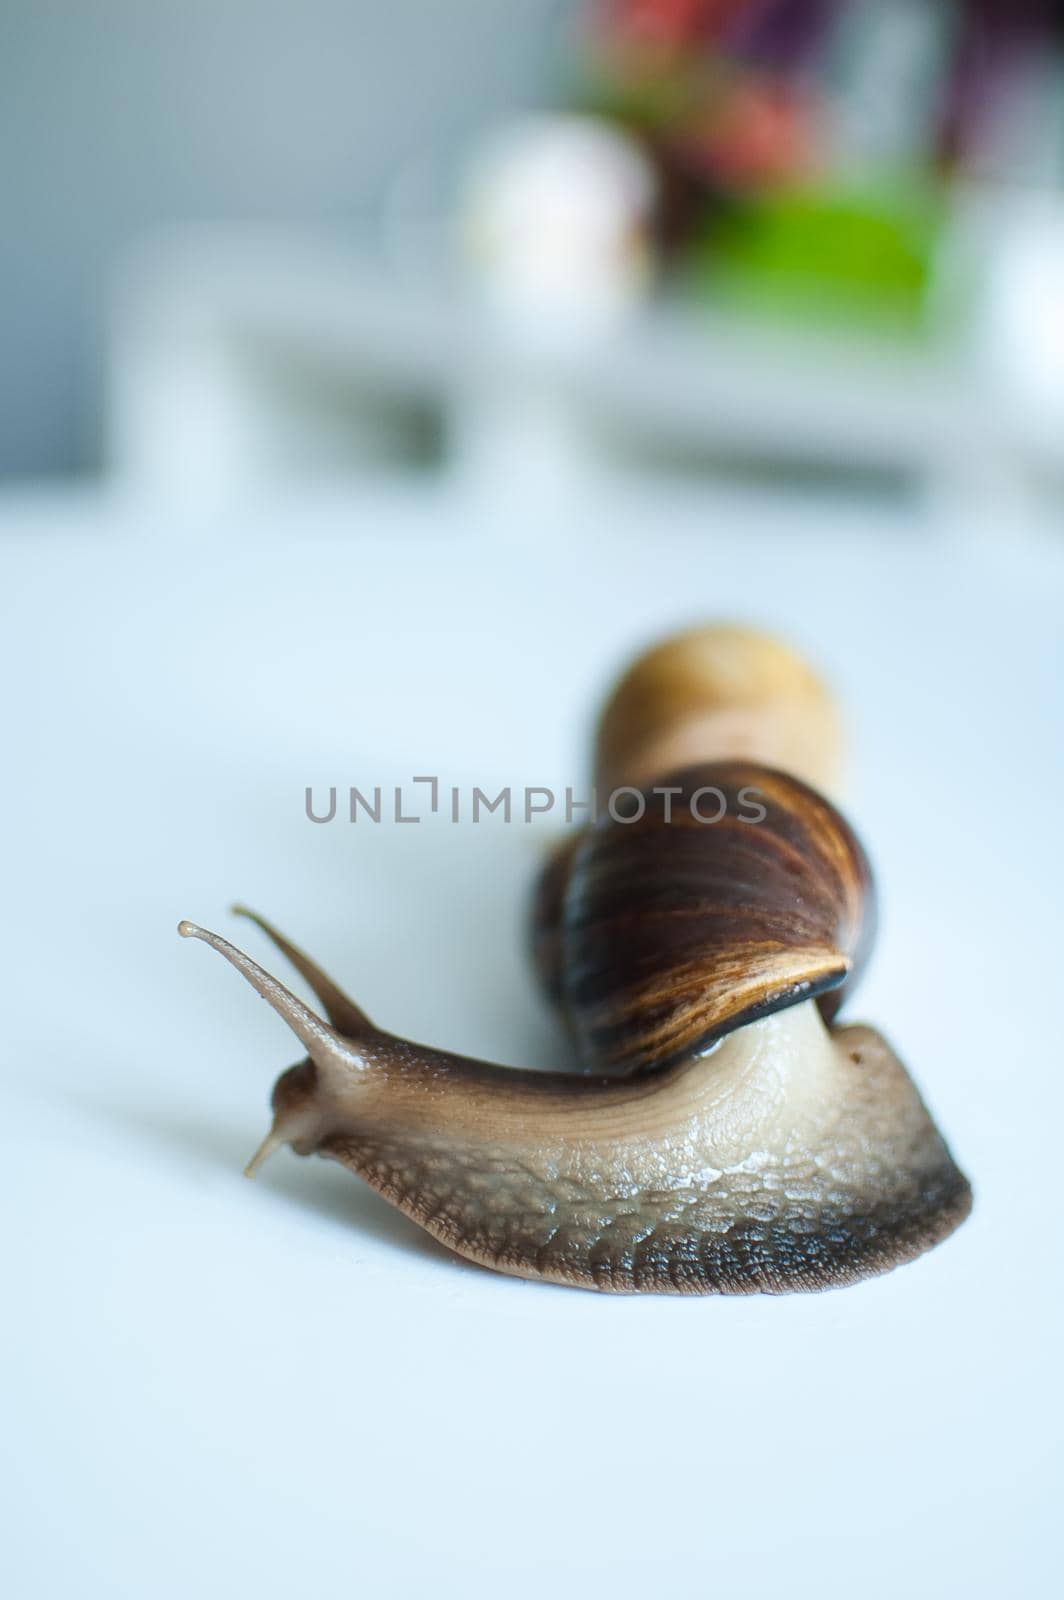 Dark brown snail achatina is crawling on white table on blurred background of the room or kitchen by balinska_lv